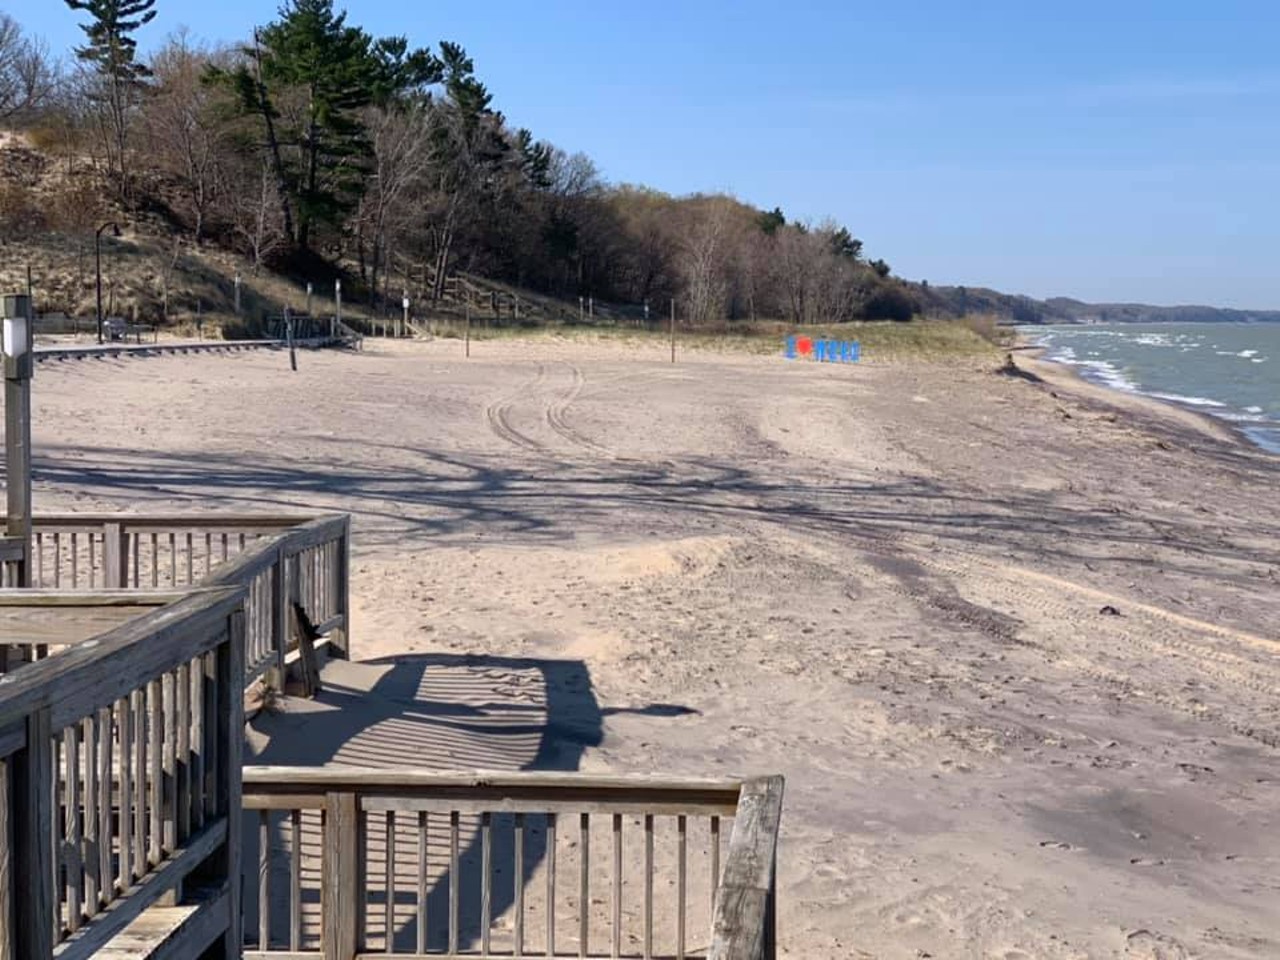 Weko Beach
Bridgman; 3 hours, 2 minutes
Weko's sunny Lake Michigan shores are impressive, as is the solitude they offer. The park includes dune boardwalks with observation decks, and picnic areas. 
Photo via Weko Beach & Campground/Facebook